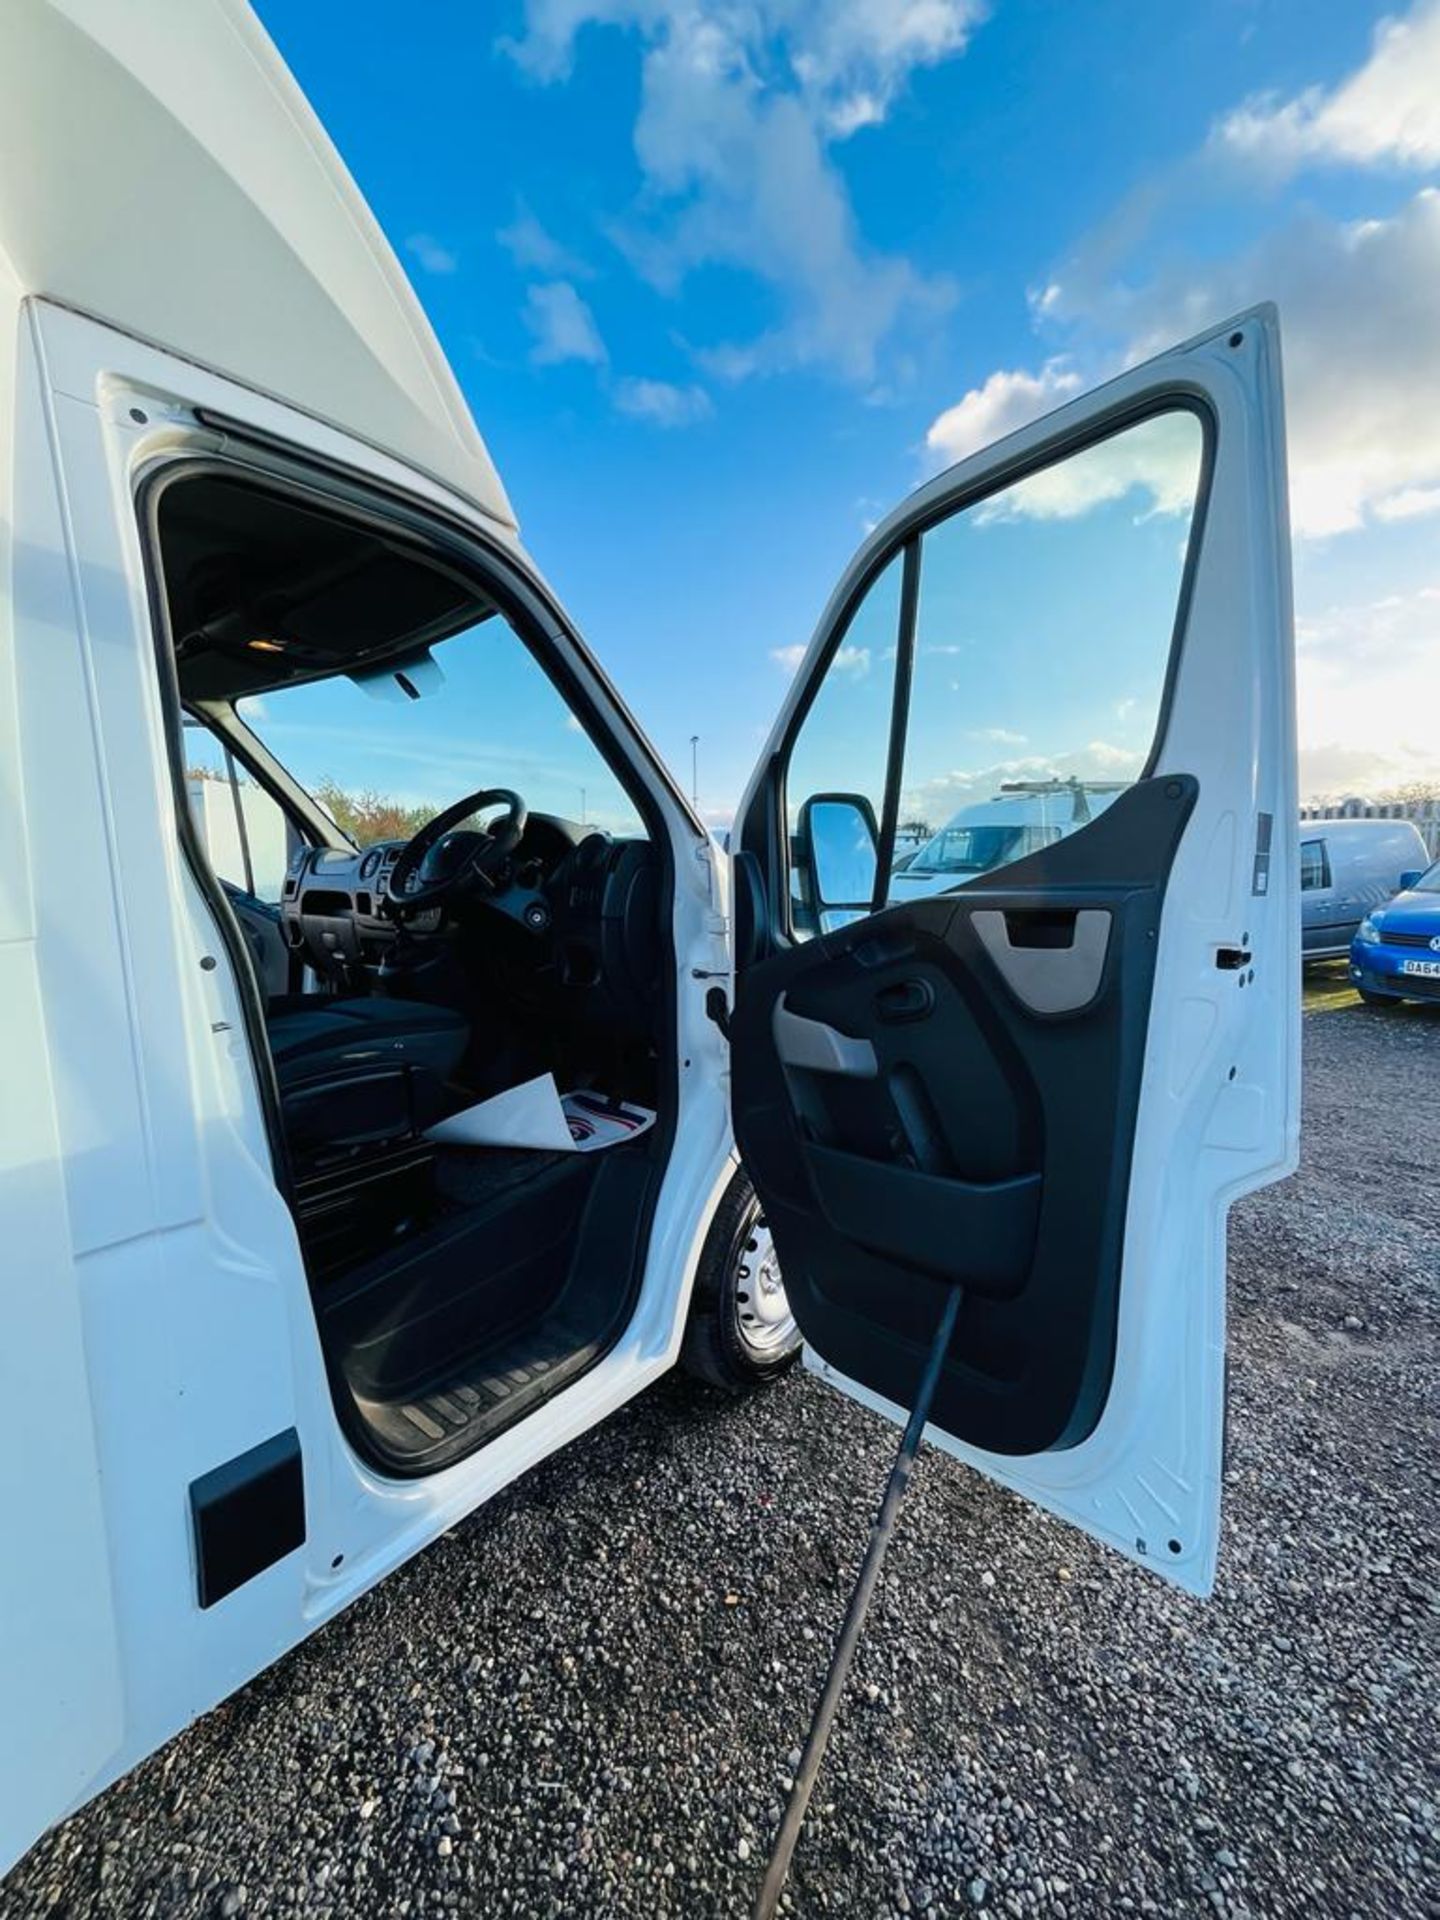 ** ON SALE ** RENAULT MASTER 3.5T RWD 2.3 LL35DCI 125 Luton 2014 "14 Reg" - A/C - Bluetooth - Image 10 of 22